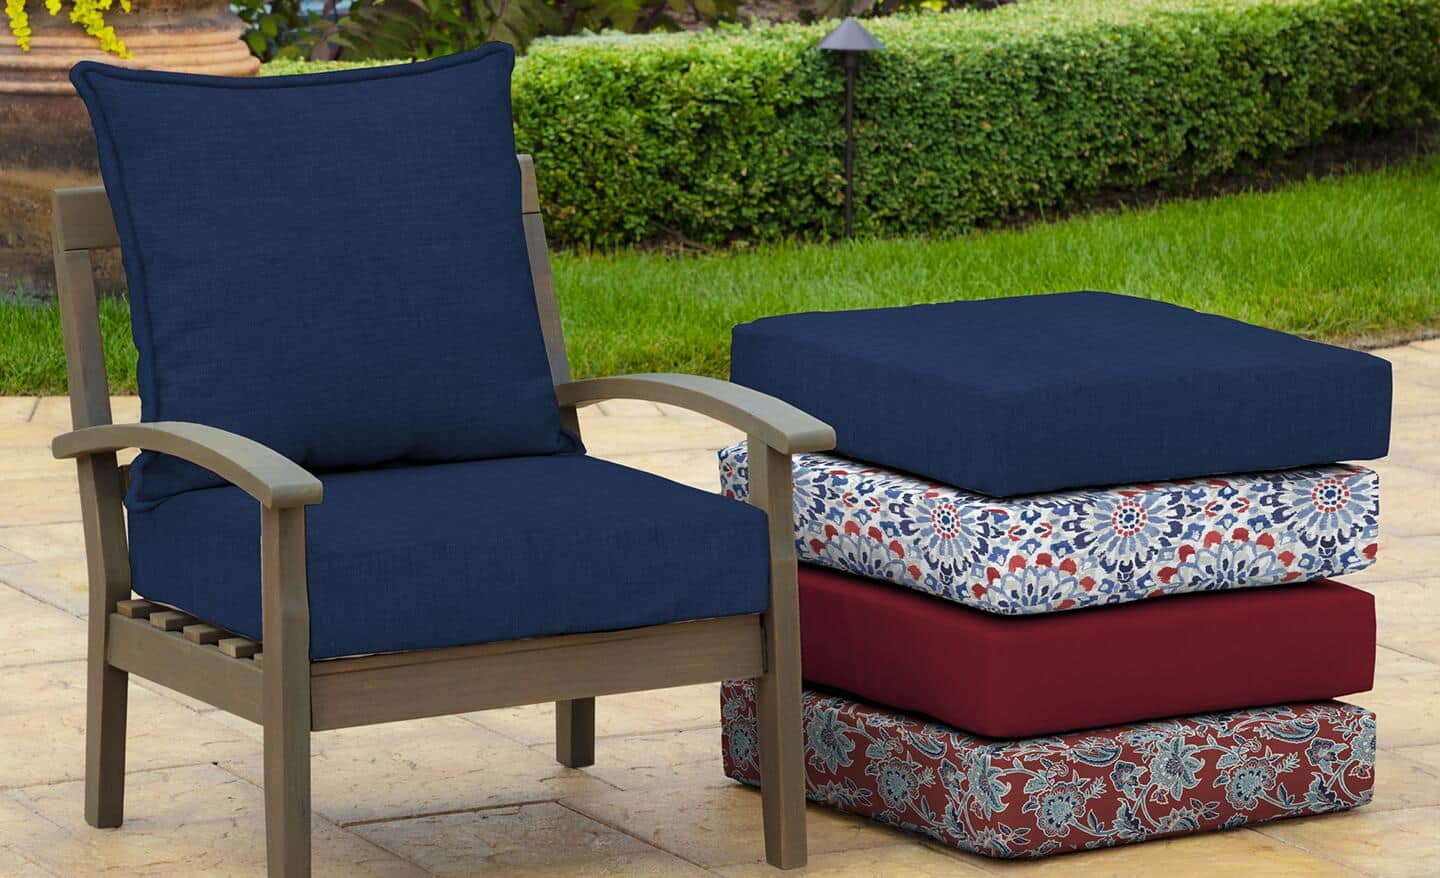 Four different colored and patterned fabric cushions stacked next to an outdoor chair with navy blue cushions.